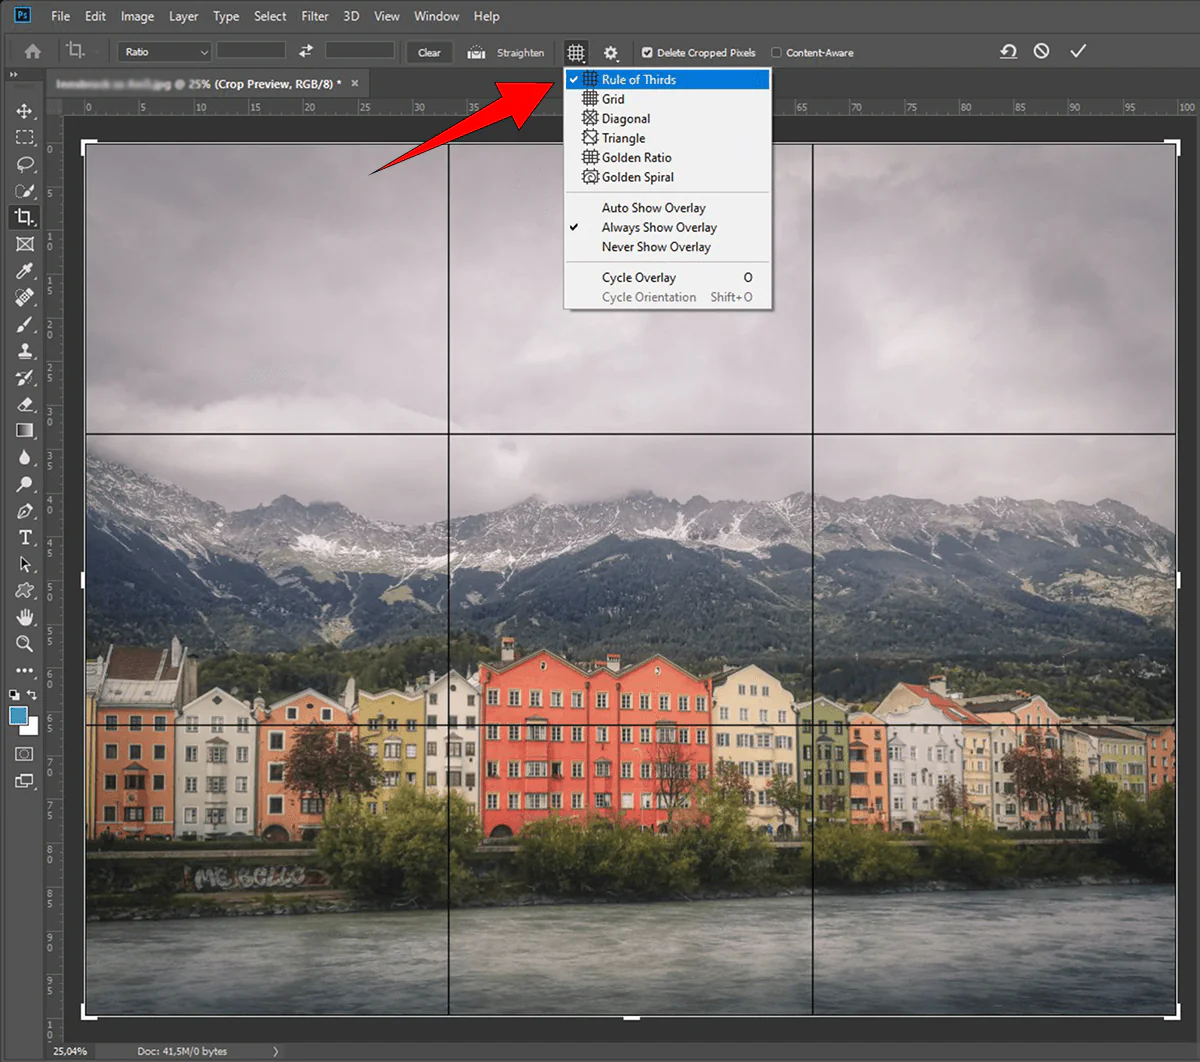 https://photutorial.com/wp-content/uploads/2020/12/Rule-of-thirds-grid-in-Photoshop-How-to-turn-it-on.png